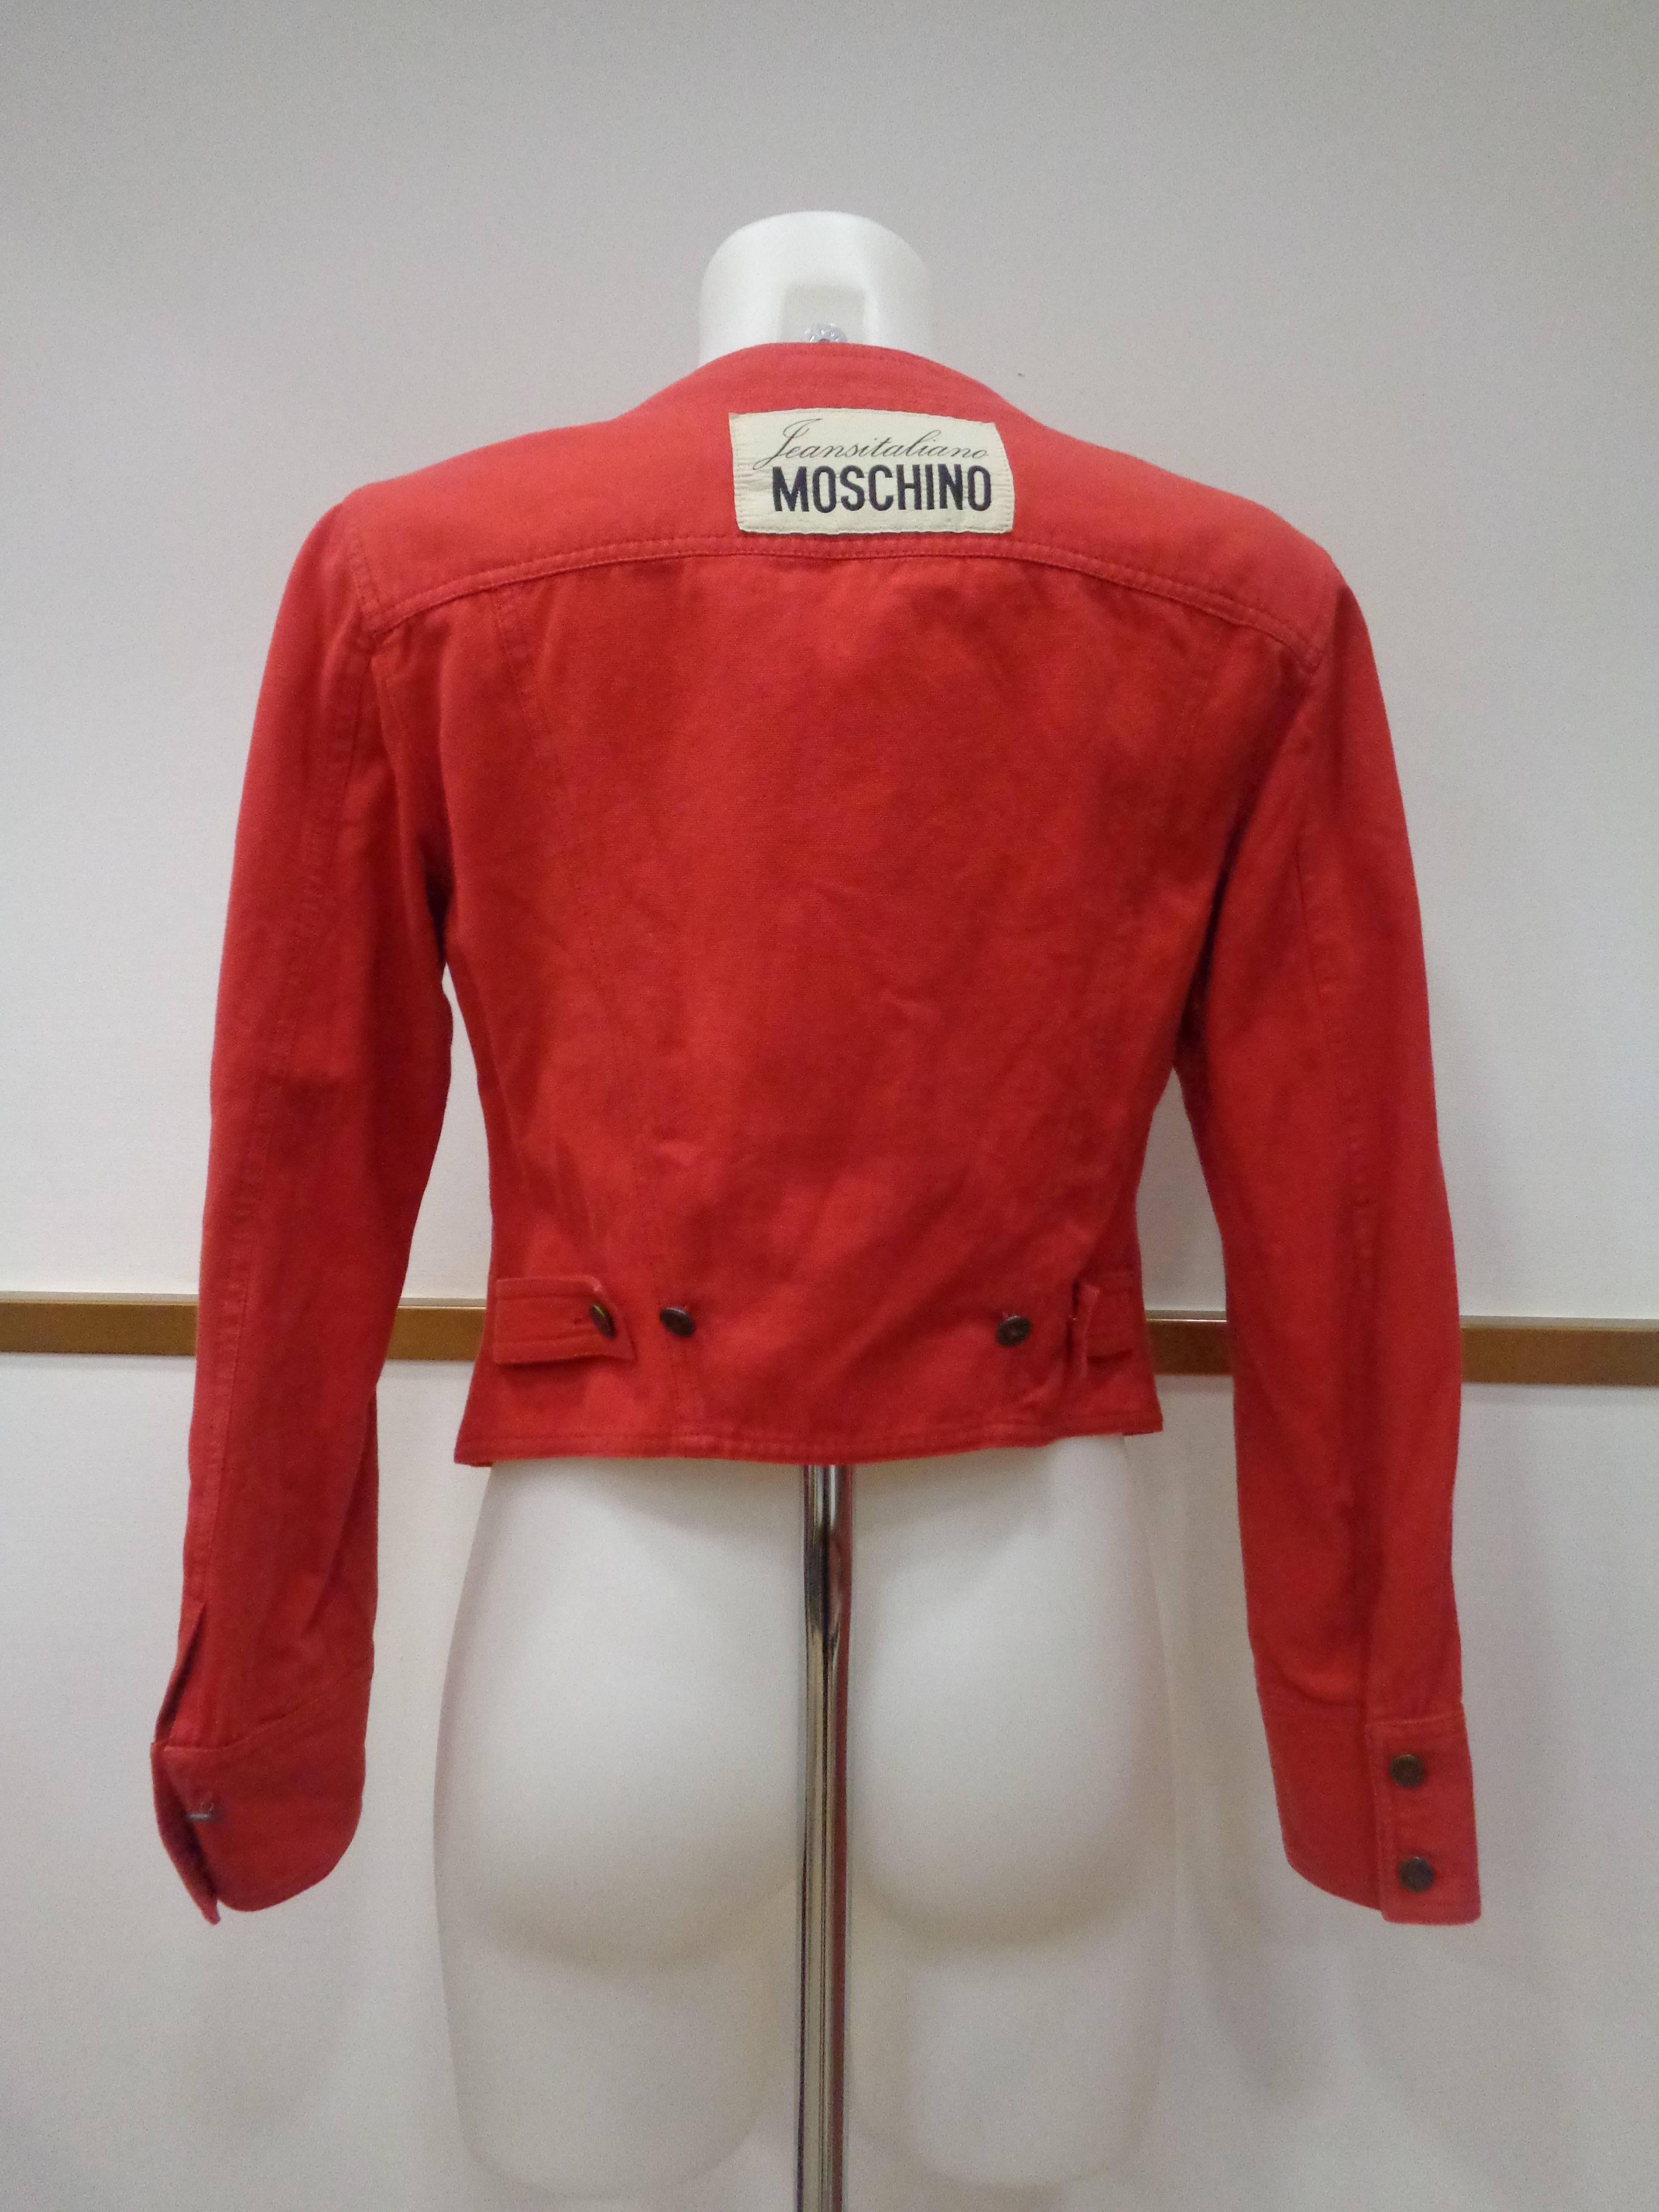 Moschino Jeans by Moschino Red Cotton Jacket 2